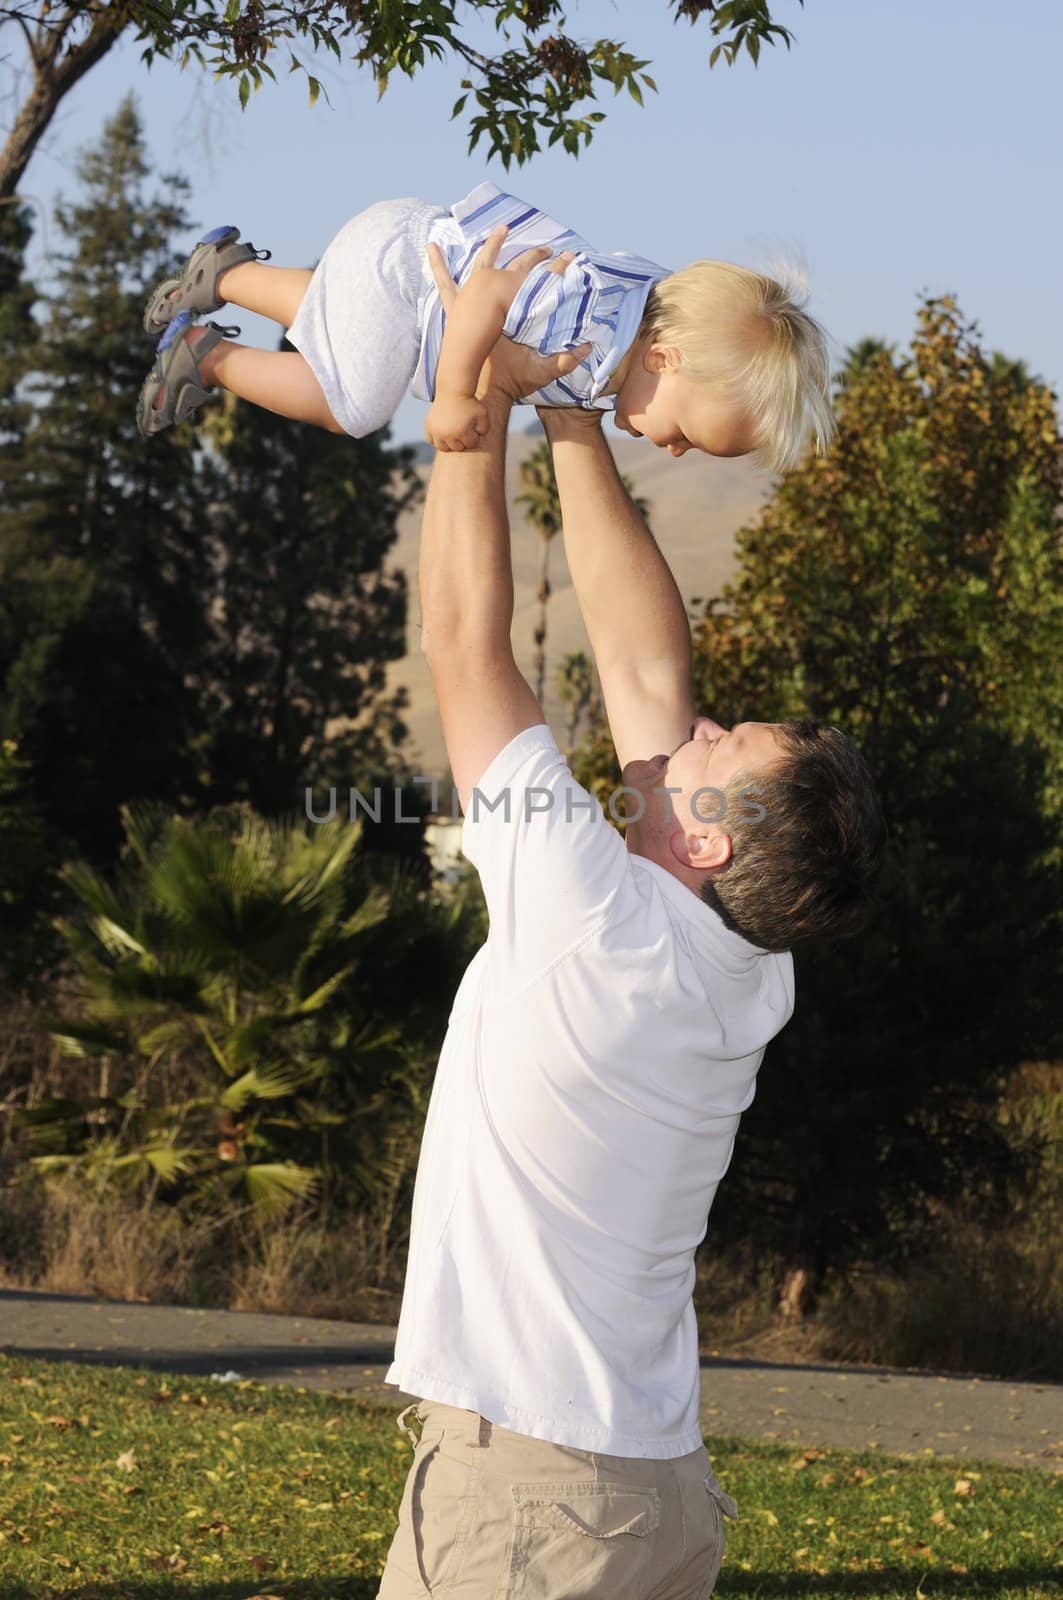 Infant being lifted into the air by father